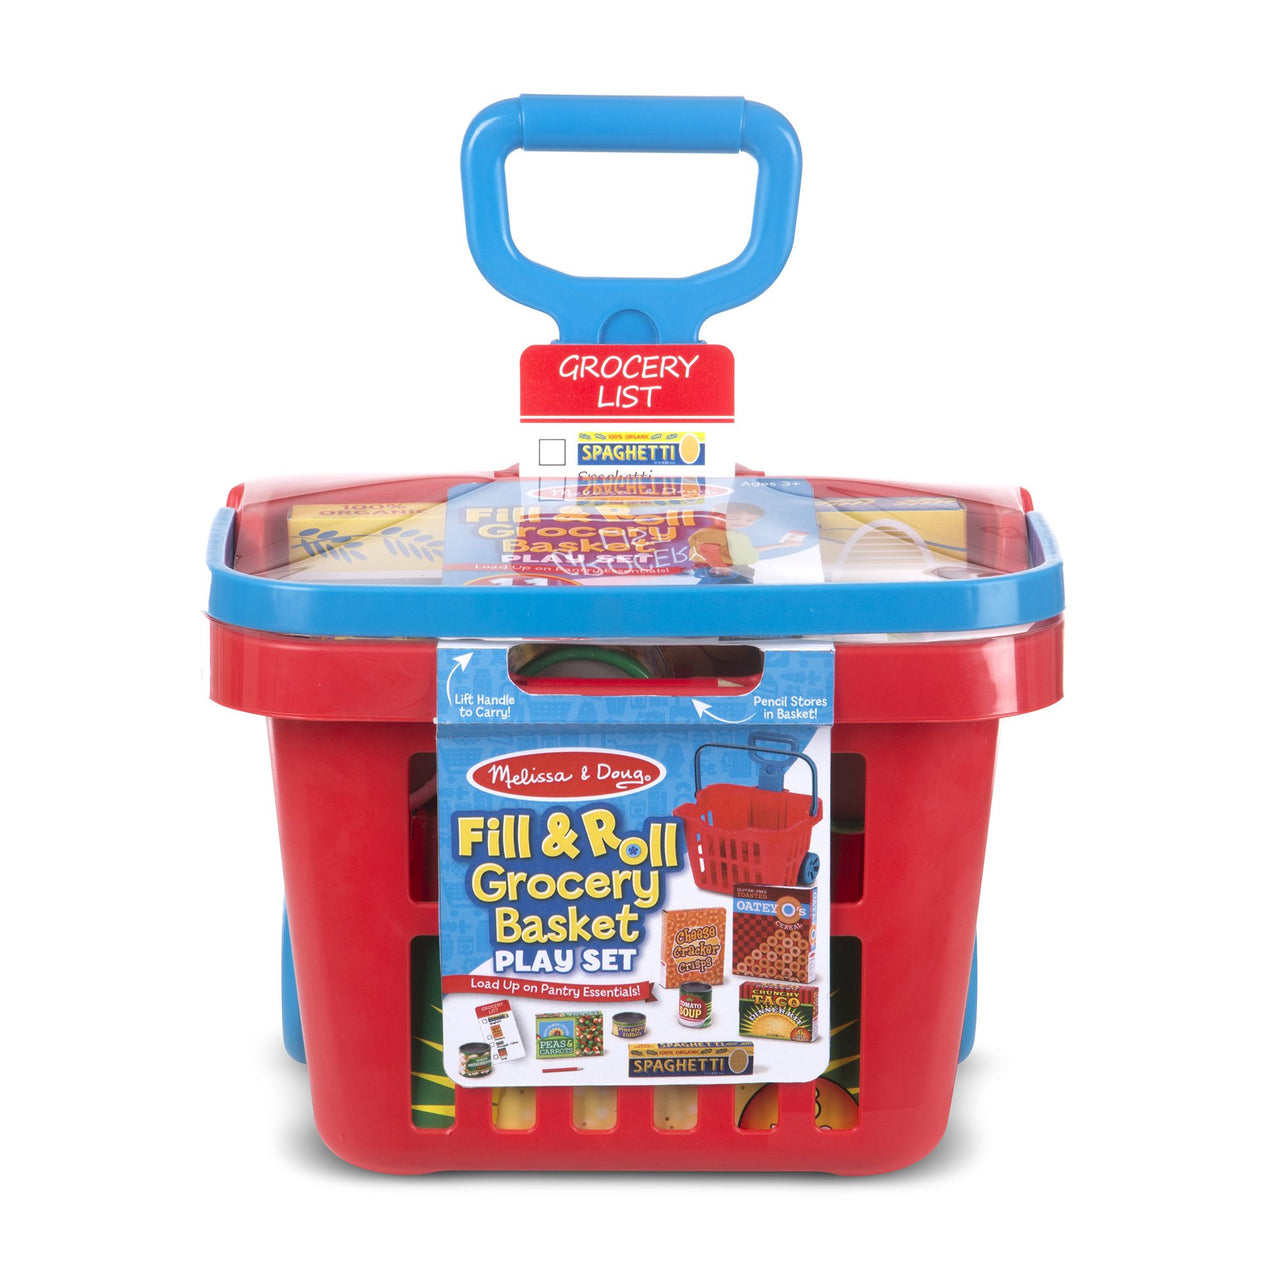 Melissa & Doug Fill and Roll Grocery Basket Play Set